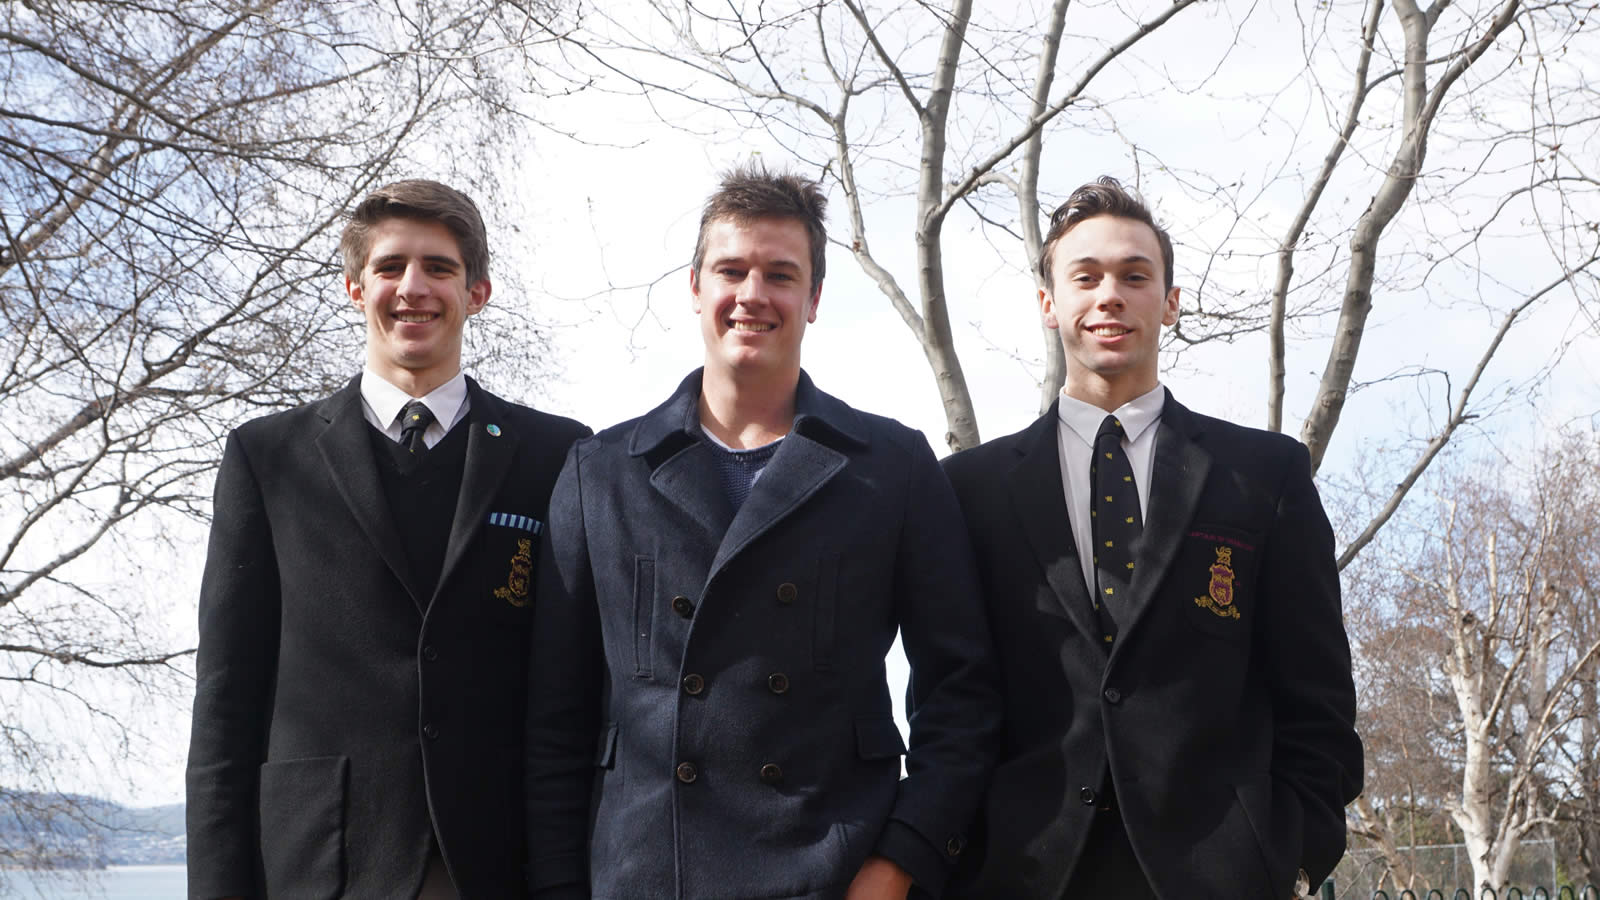 Tom is pictured with Year 12 students Angus Calvert and Michael Young.